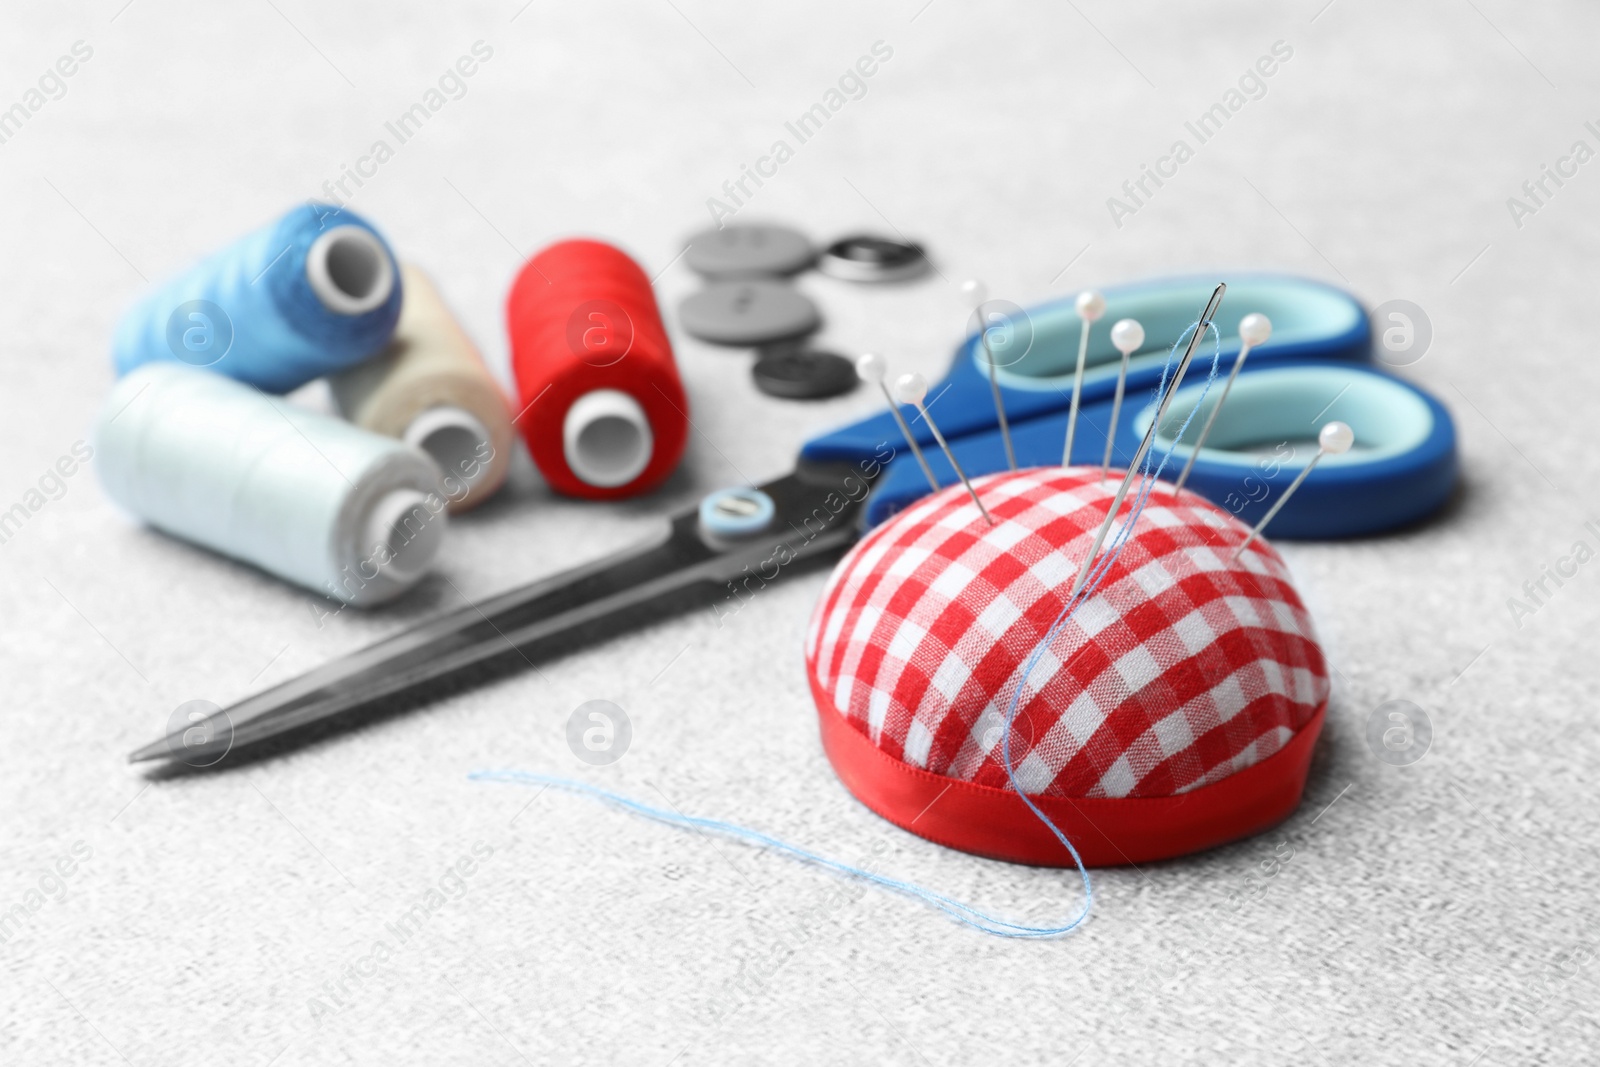 Photo of Pincushion, spools of threads, buttons and scissors on white background